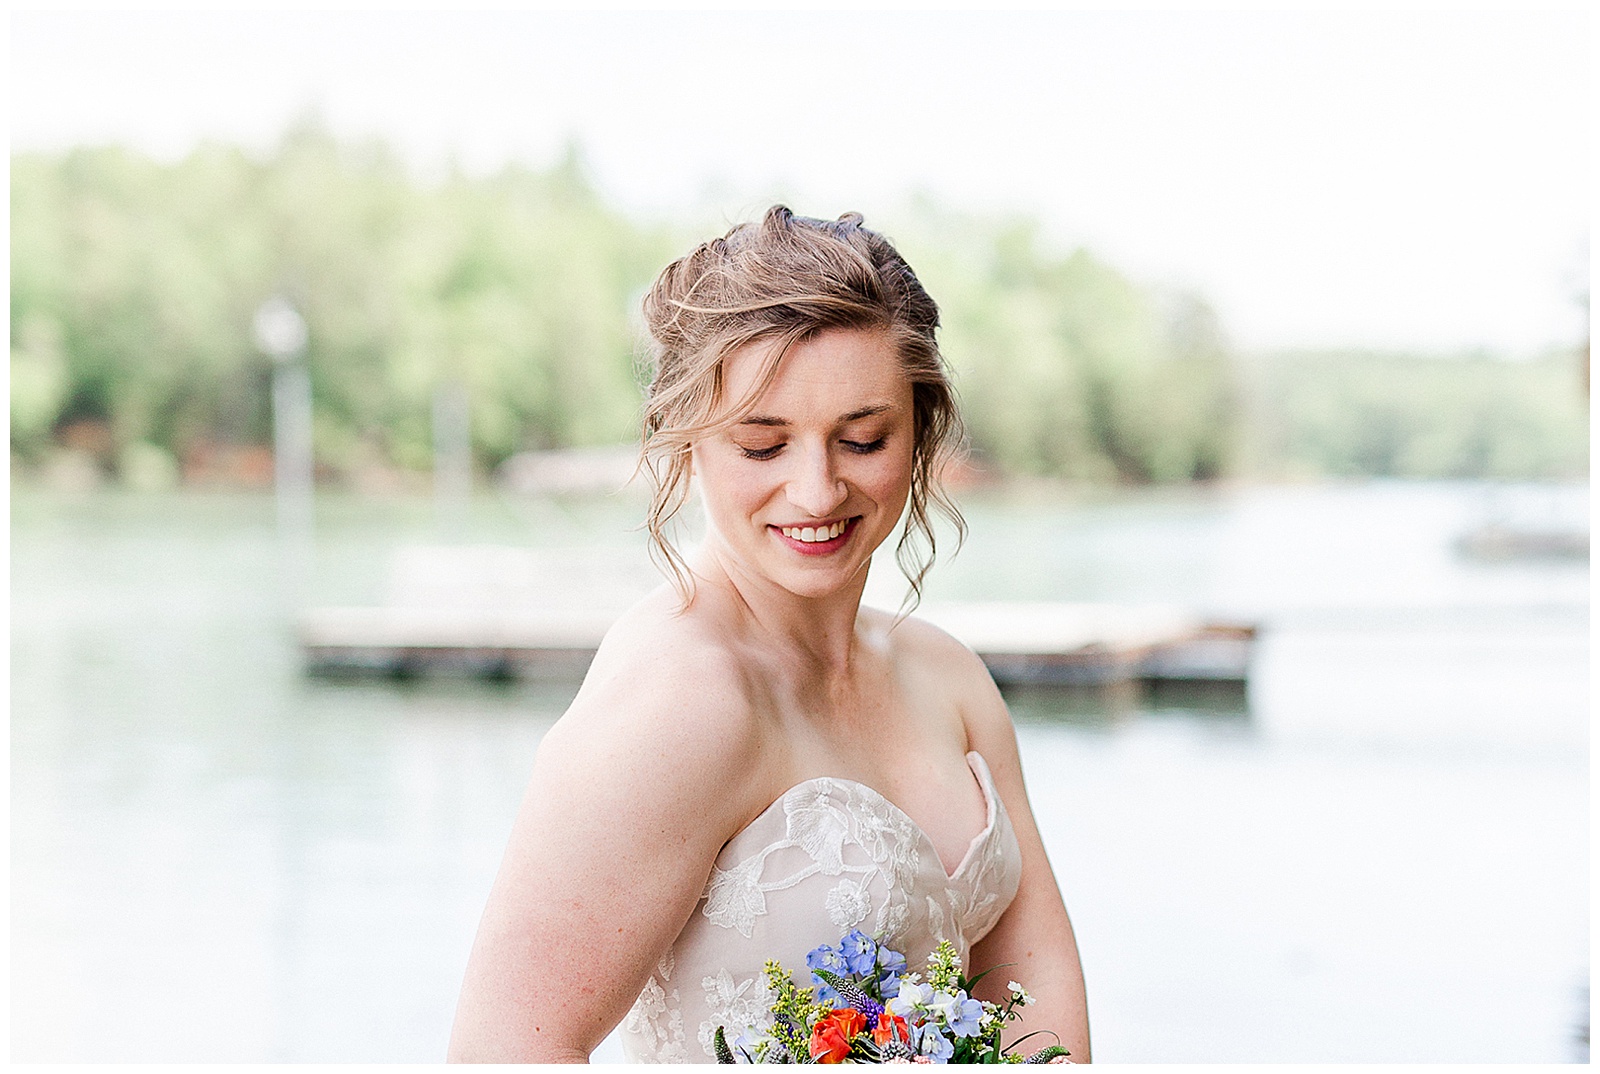 pier on the water location 👰 Bride: lace wedding dress + veil 💐 Colorful orange and blue bouquet 📸 Outdoorsy Lake and Mountain Bridal Session with Julia | Kevyn Dixon Photography